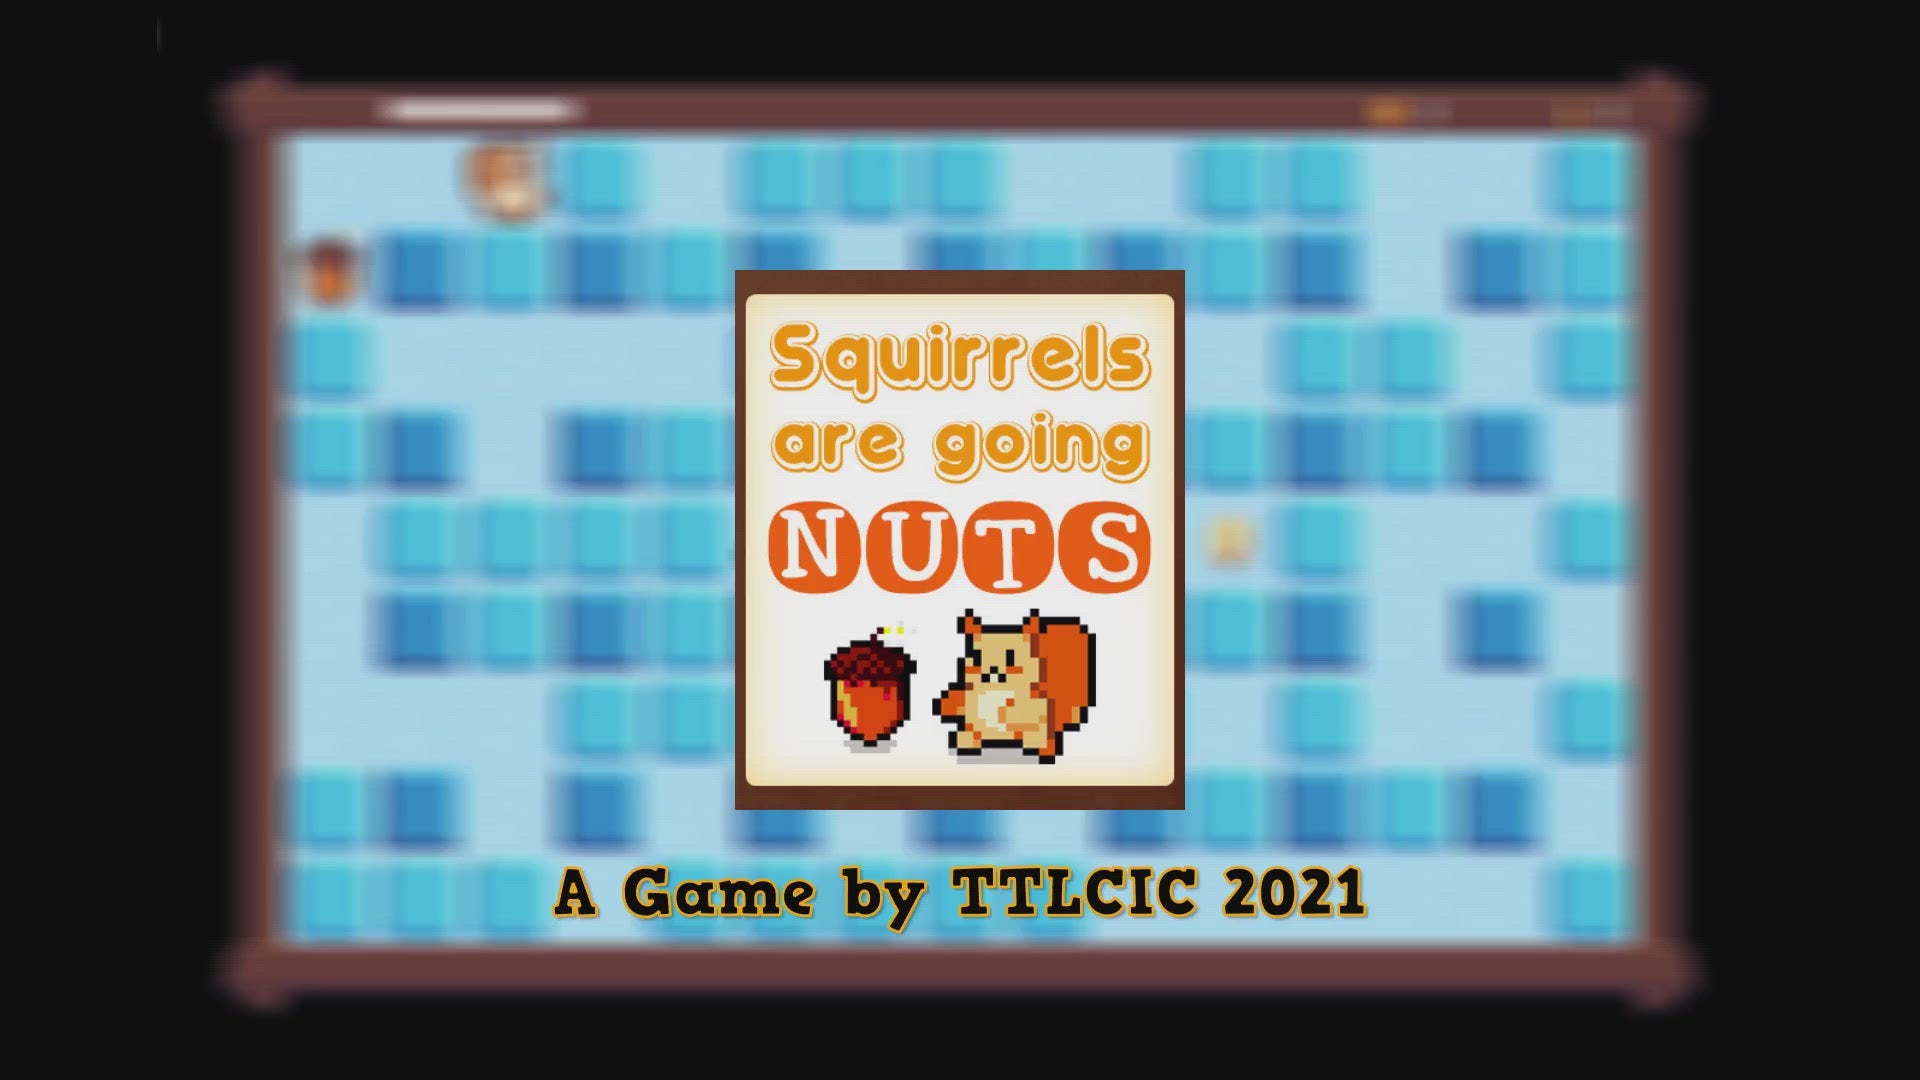 Squirrels are going NUTS - indie action game, puzzle 02 (TTLcic)